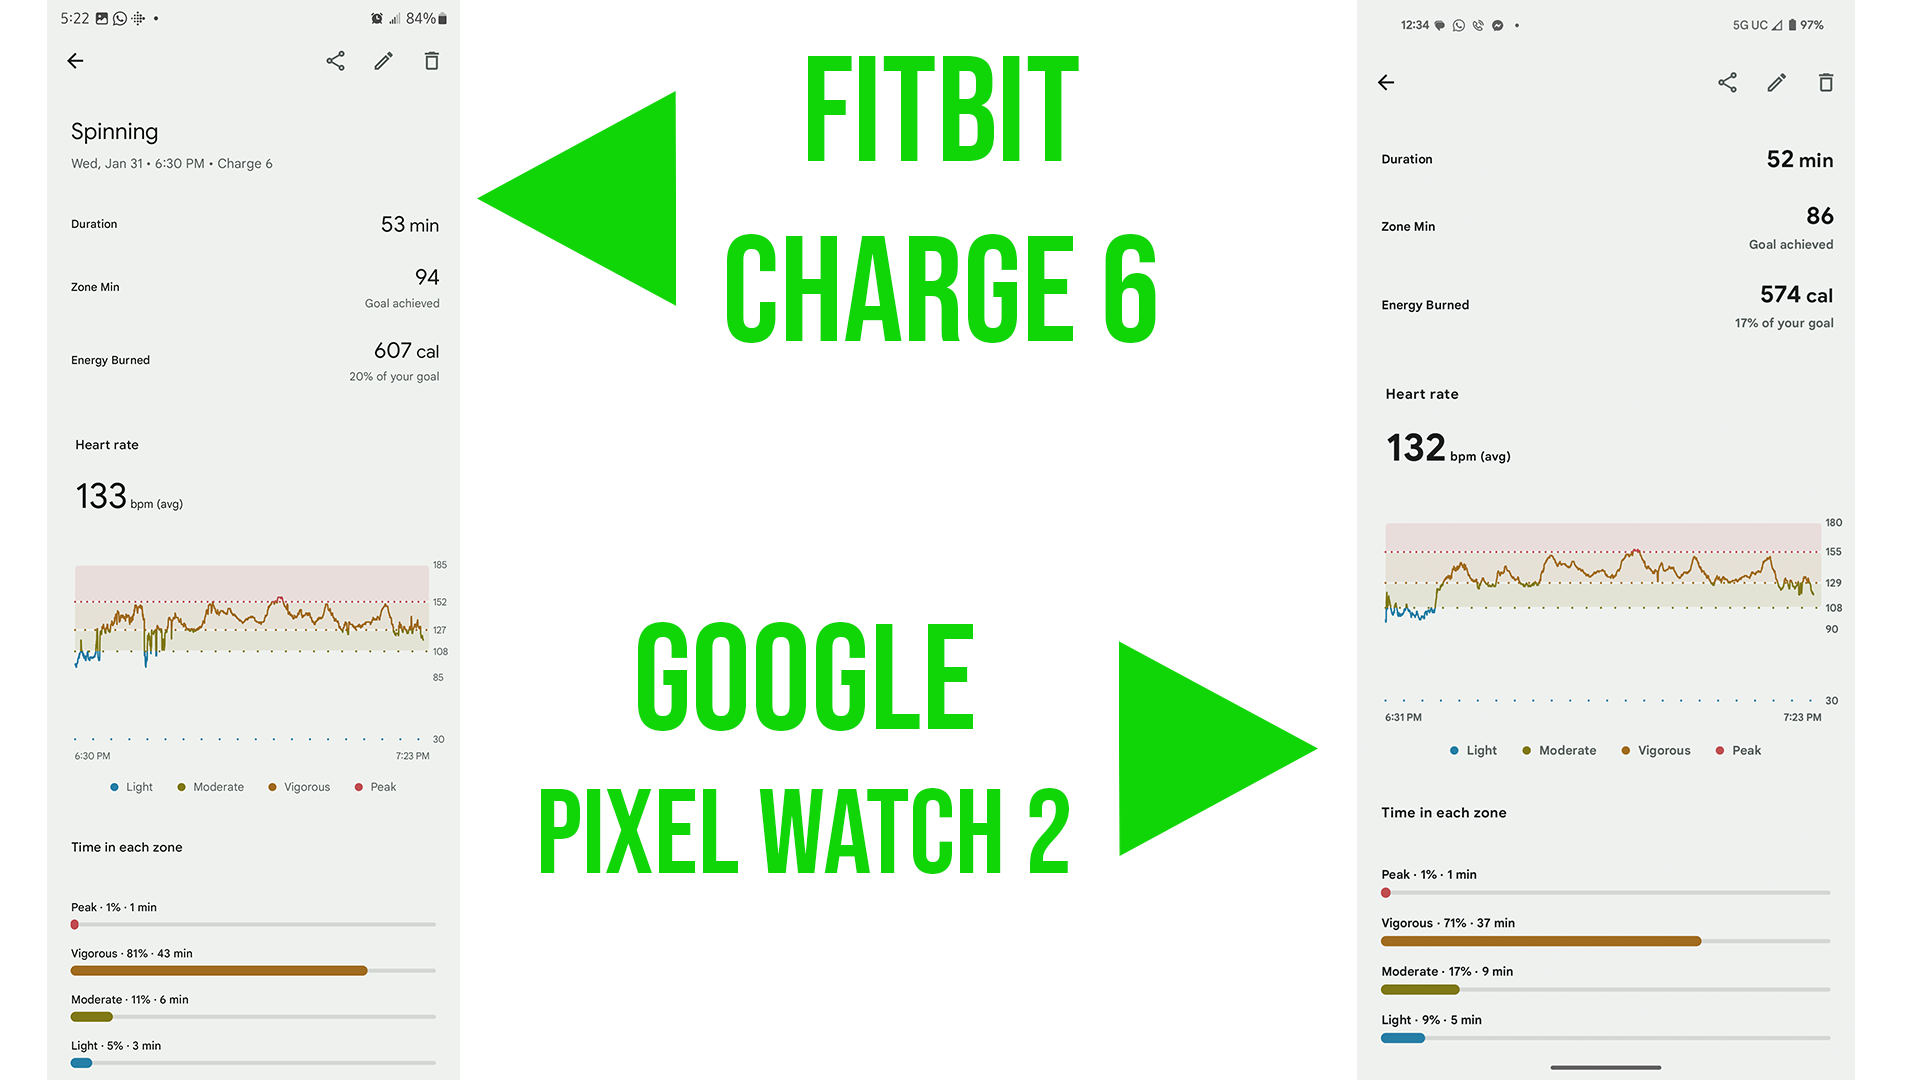 heart rate results for both wearables